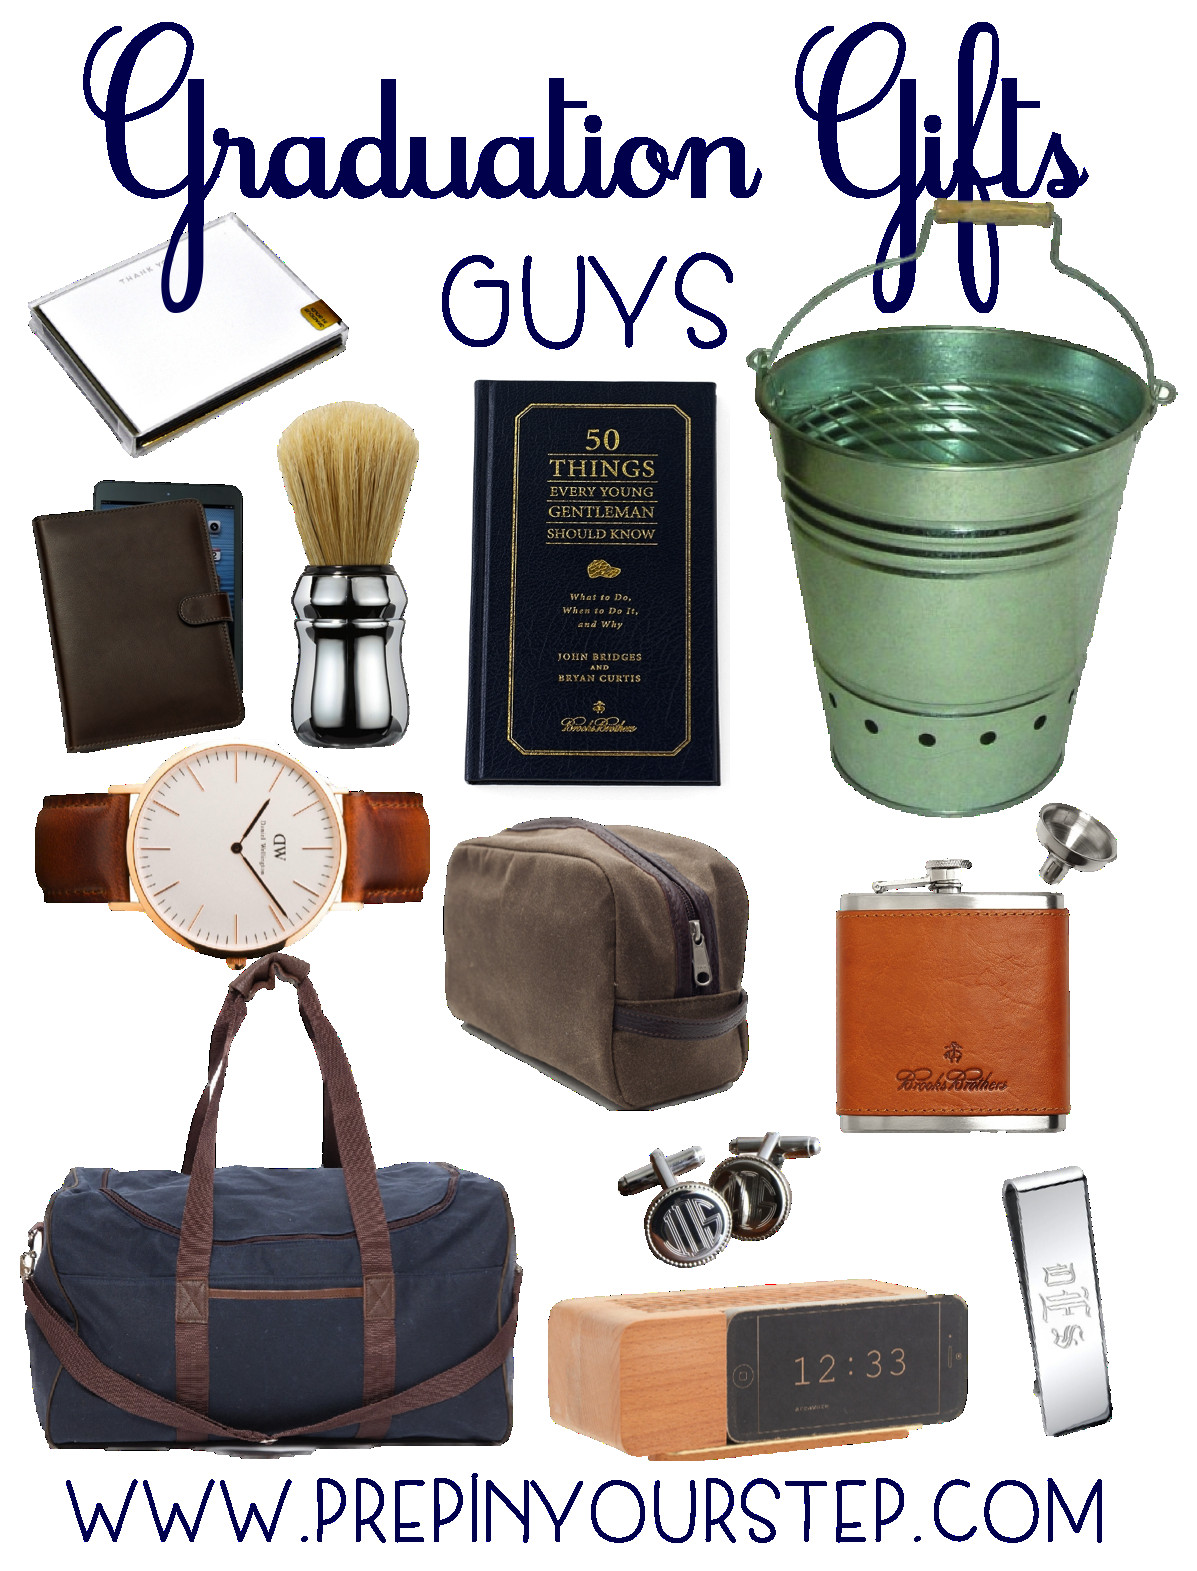 Graduation Gift Ideas For Guys
 Graduation Gift Ideas Guys & Girls Prep In Your Step